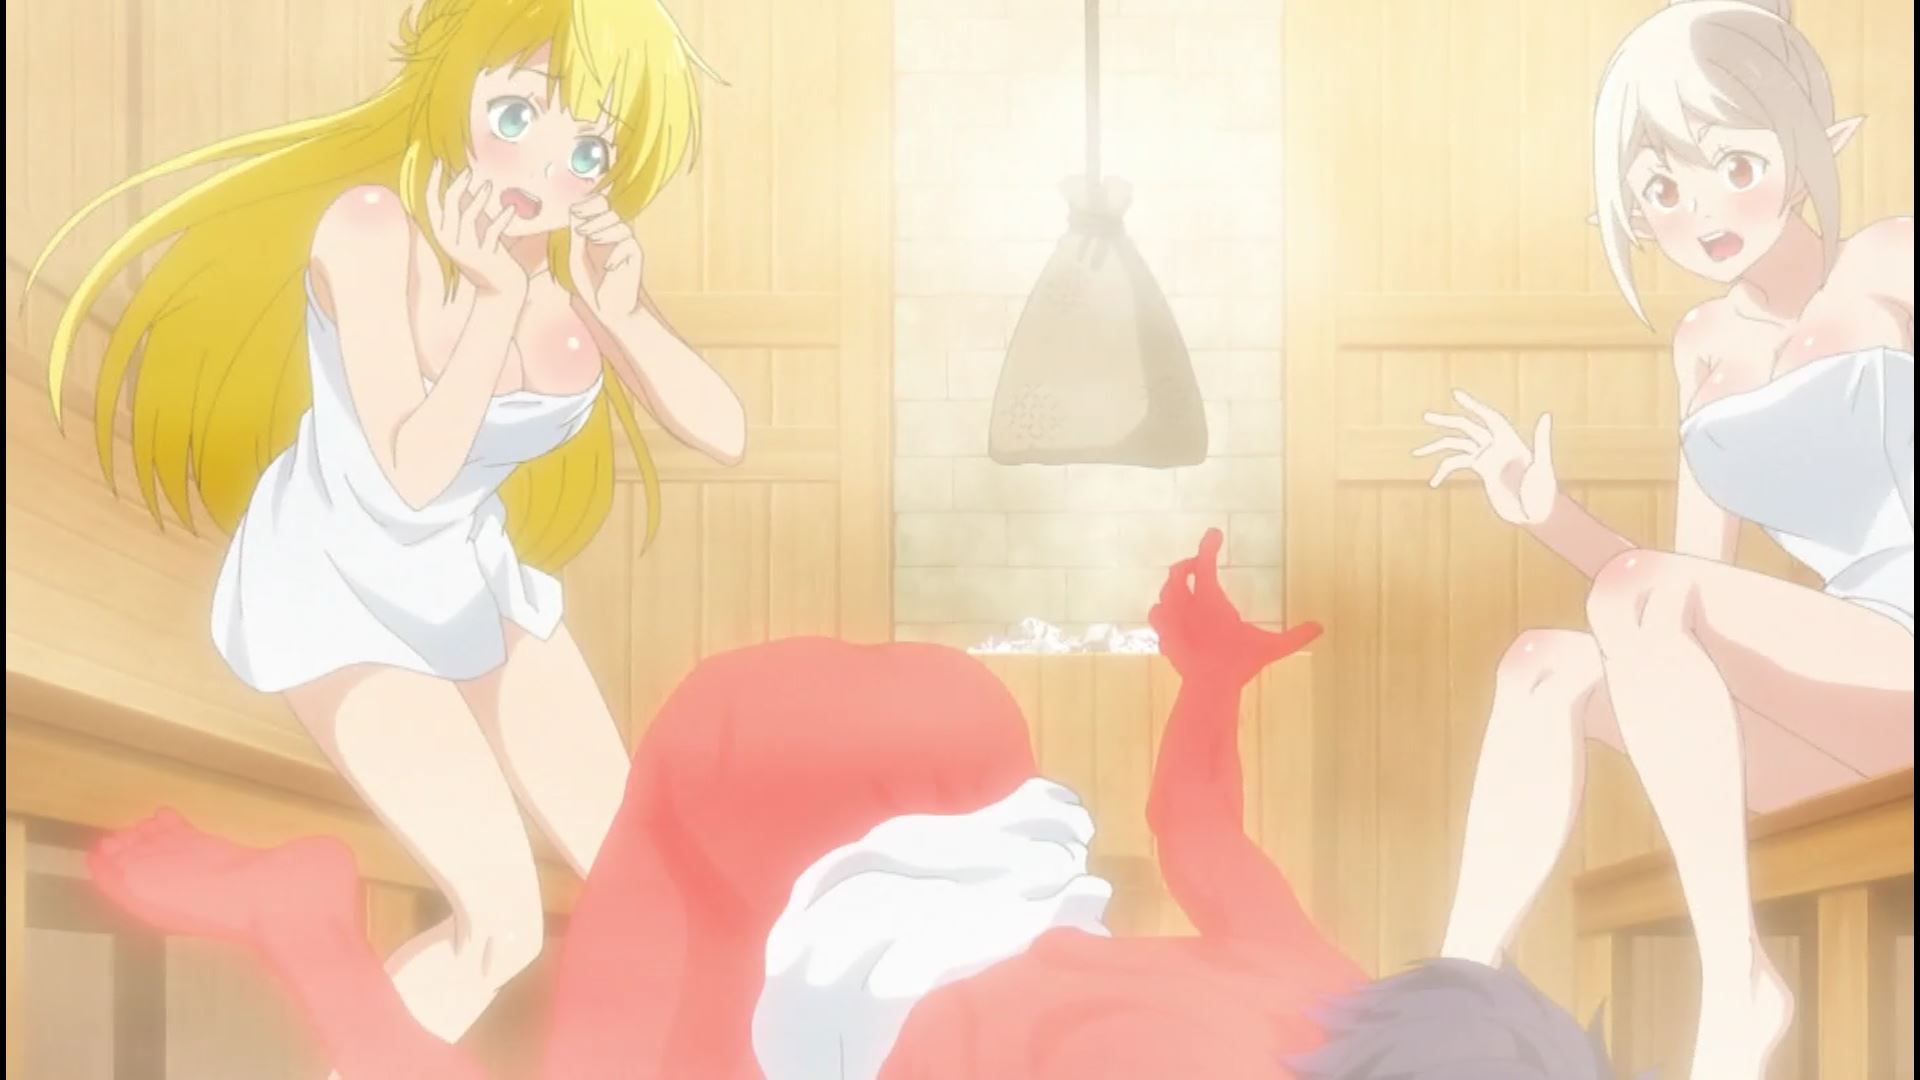 In episode 4 of the anime "True Companion", there is an erotic scene where you enter the sauna naked with an erotic boob girl! 24